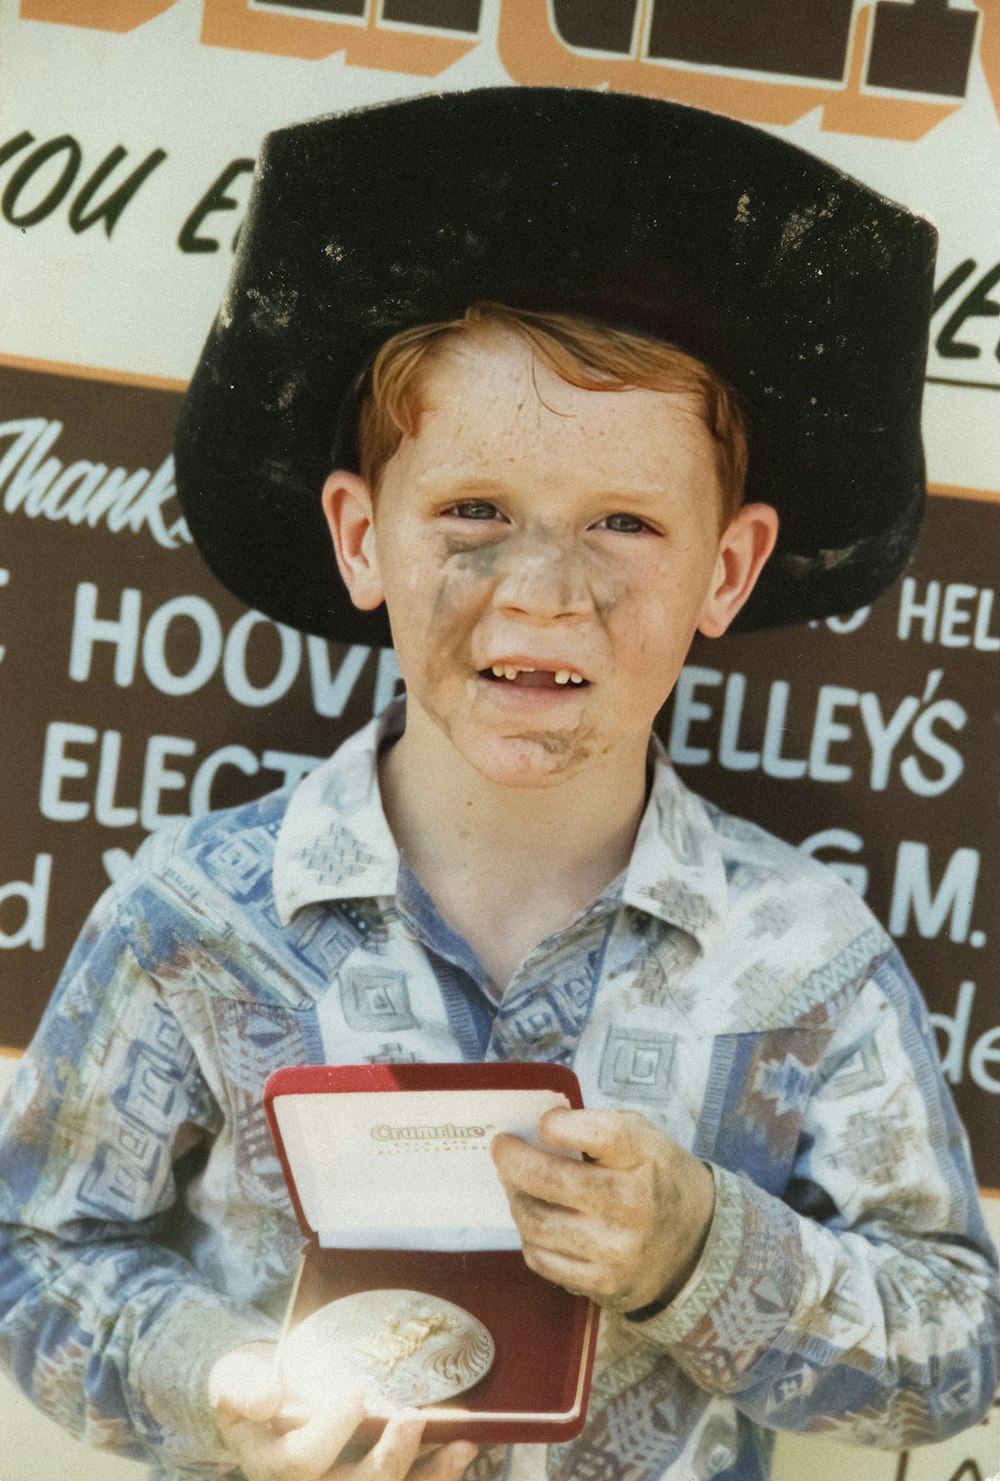 a young boy wearing a black hat and holding a medal